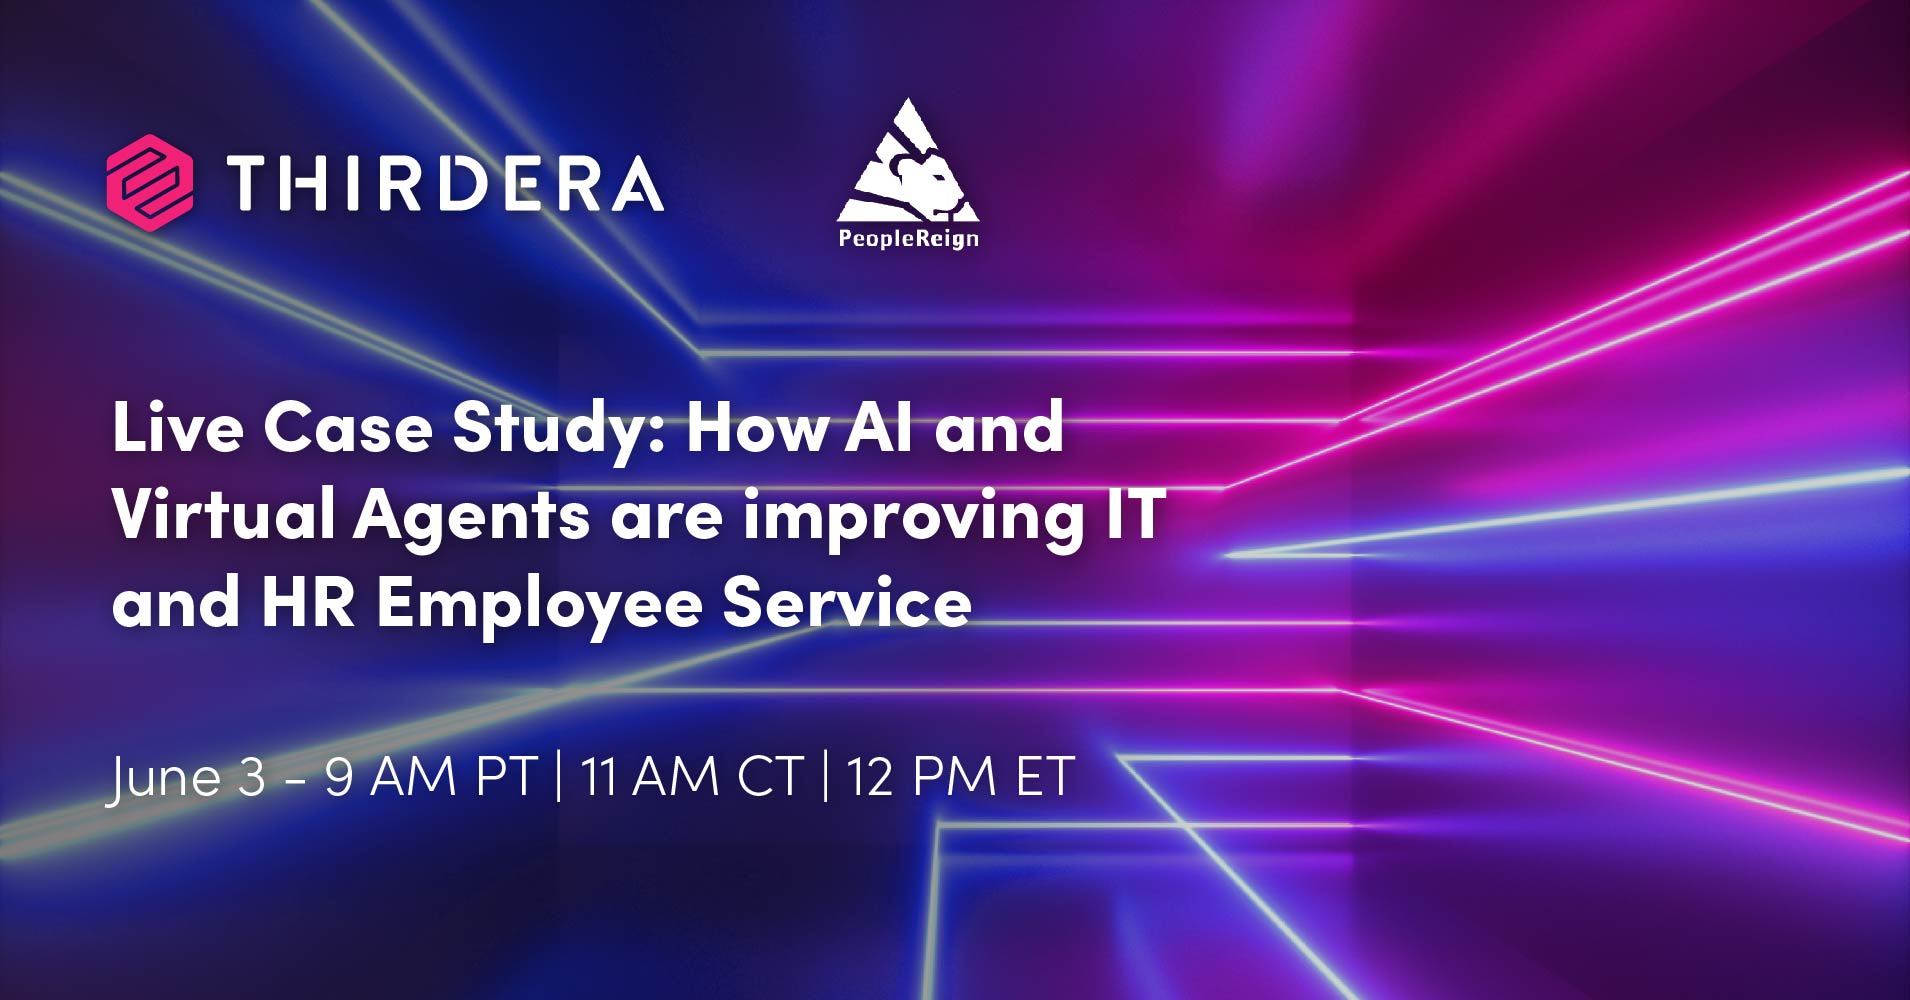 Register for this live case study today!